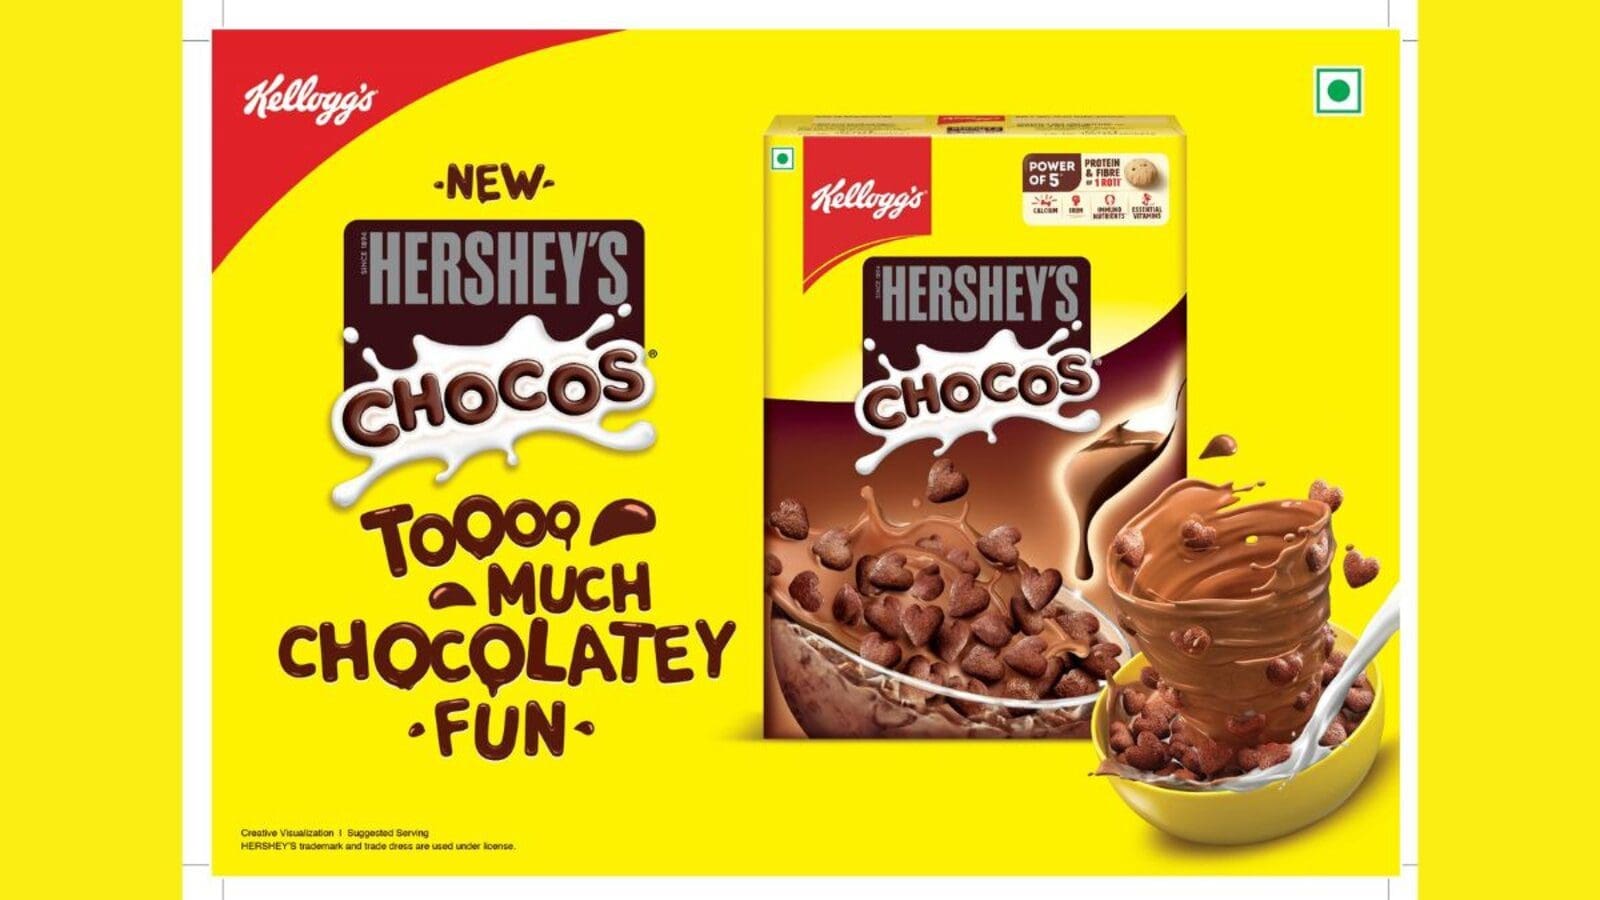 Kellogg’s and Hershey’s collaborate to launch a co-branded Chocos cereal variant in India